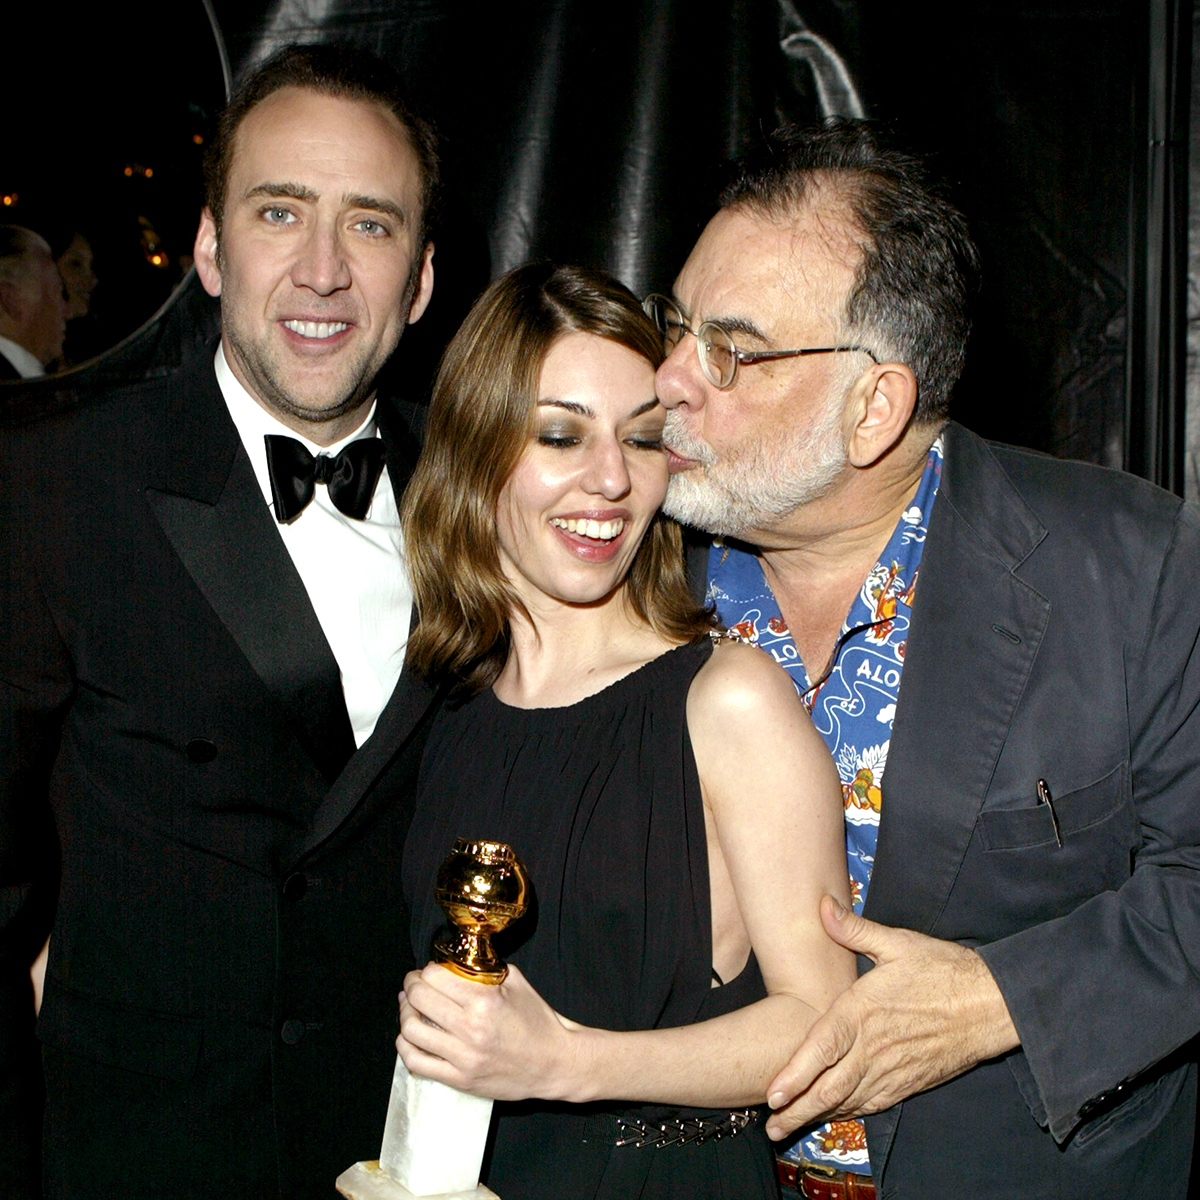 Francis Ford Coppola interviews 5-year-old daughter, Sofia